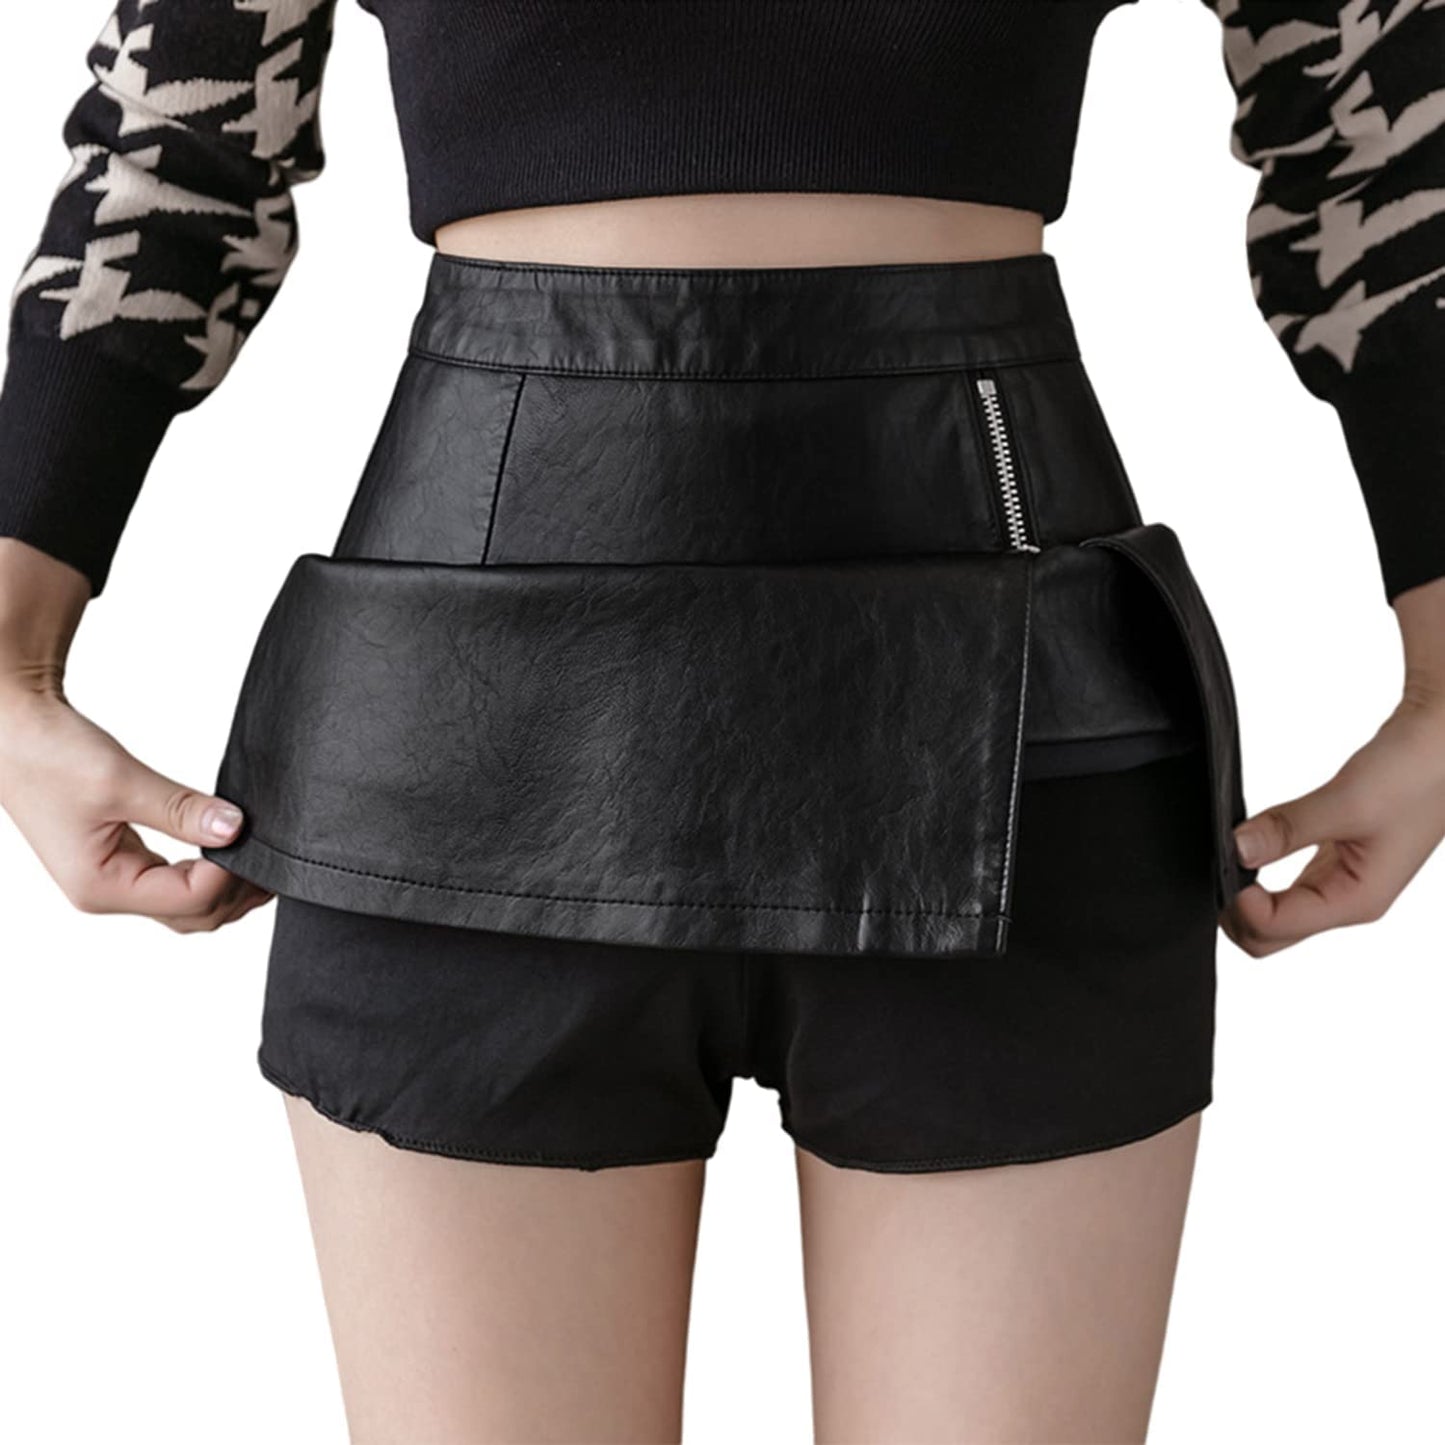 Aiphamy Faux Leather Mini Skirt High Waisted Bodycon A Line Pencil Short Skirt with Zipper for Women